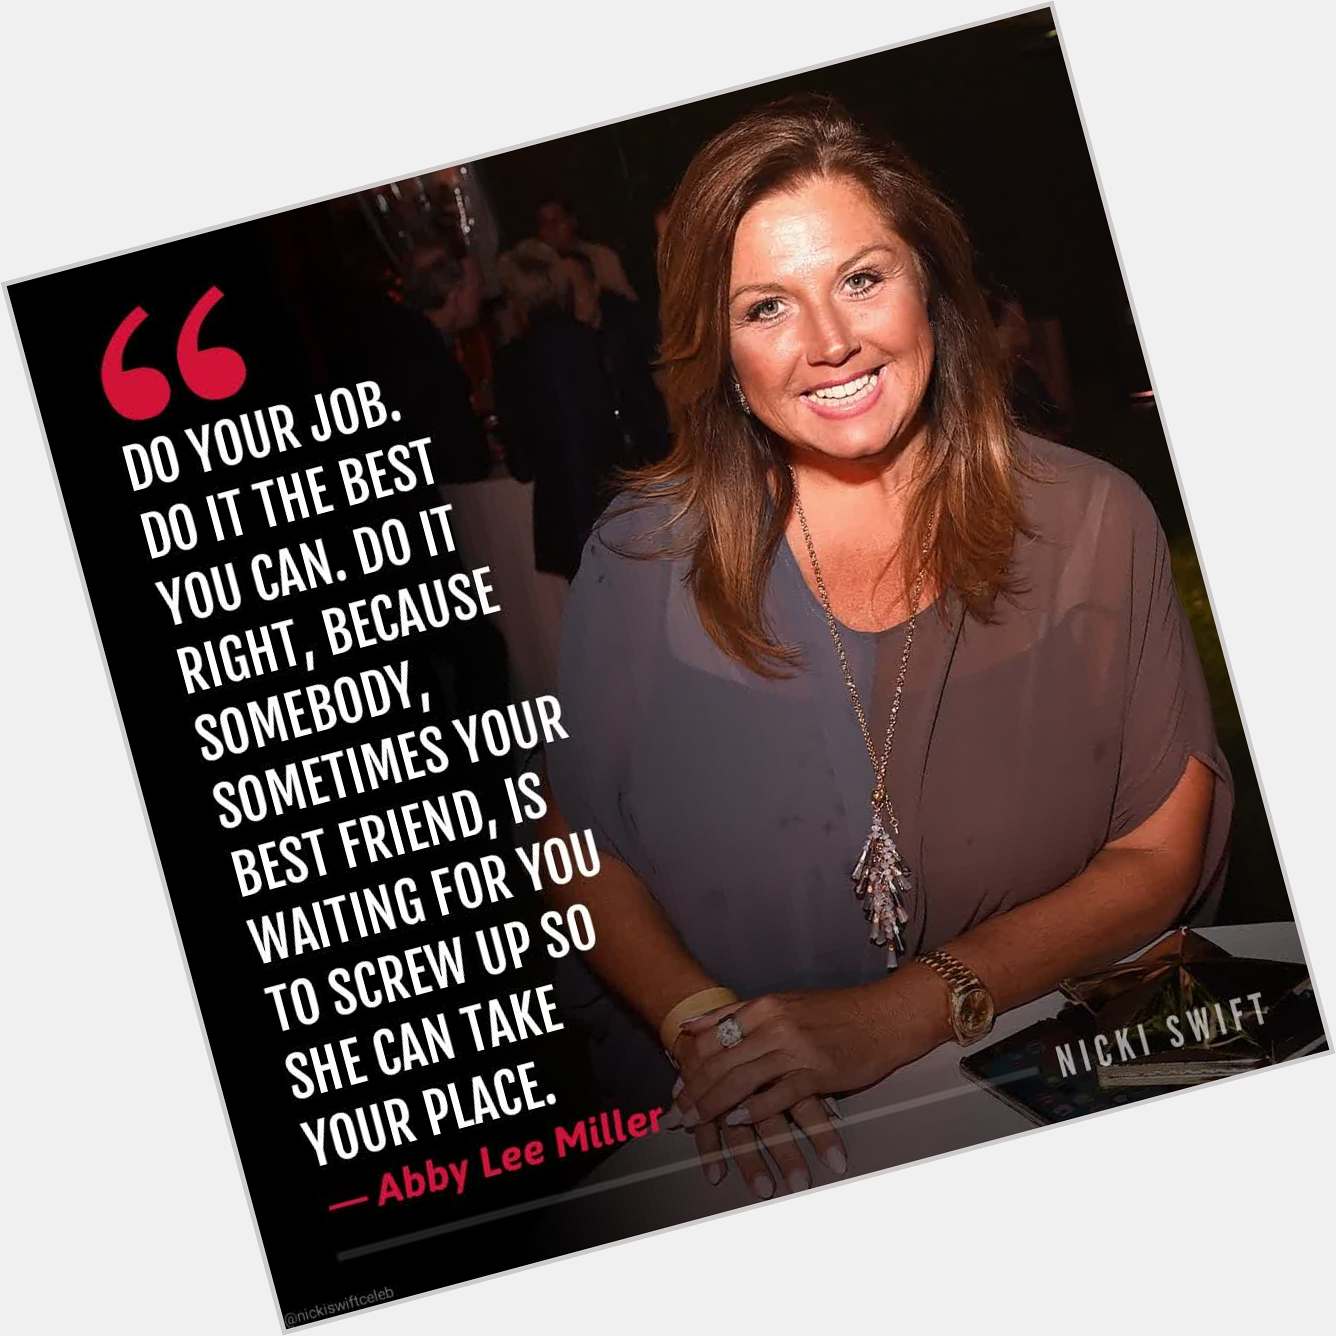 Happy Birthday to the Queen of all Virgos, Abby Lee Miller 